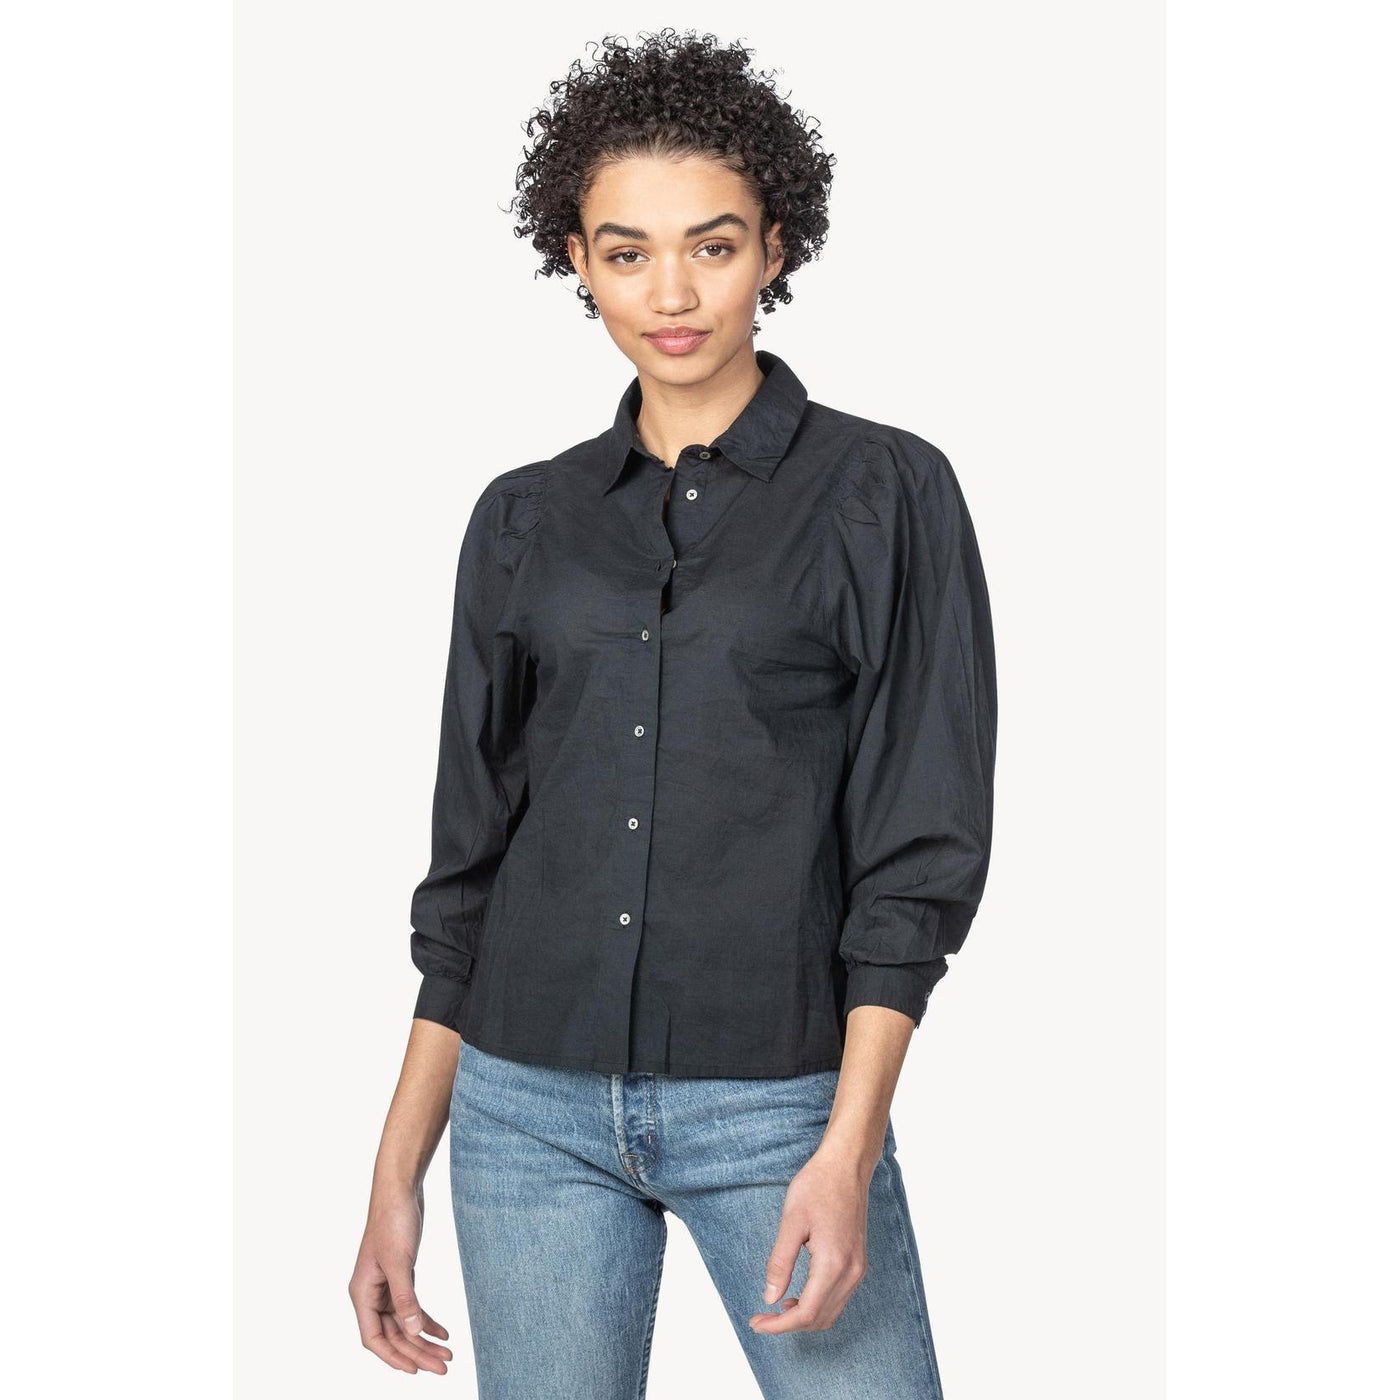 Lilla P Shirred Sleeve Buttondown-WOMENS CLOTHING-Kevin's Fine Outdoor Gear & Apparel